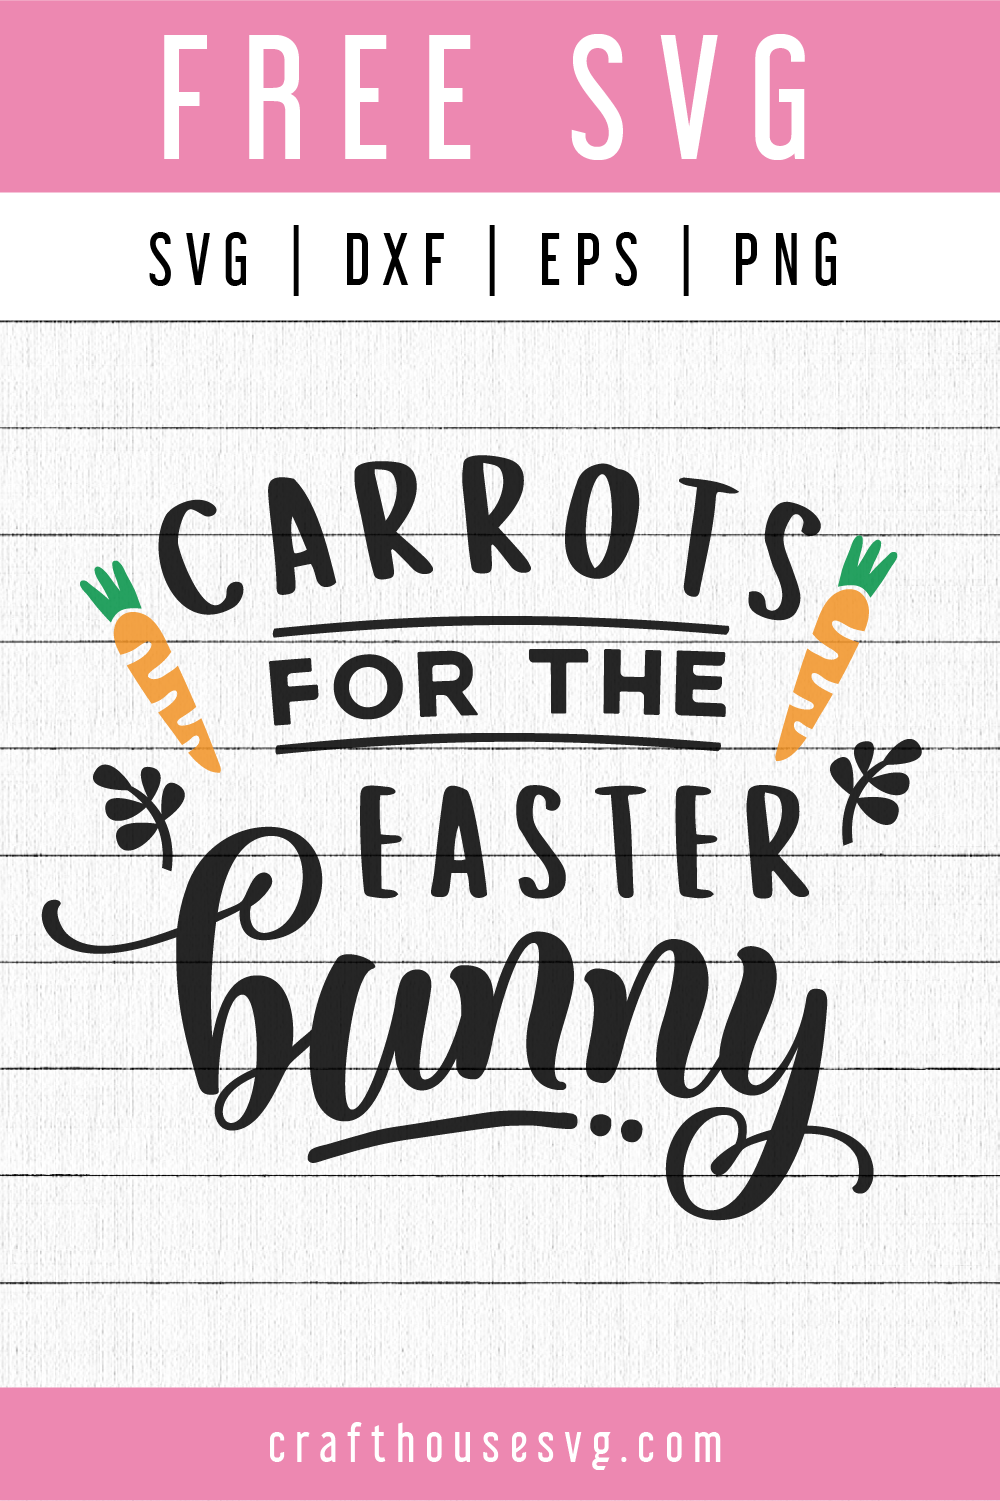 Free Carrots for the Easter Bunny SVG | FB69 Craft House SVG - SVG files for Cricut and Silhouette